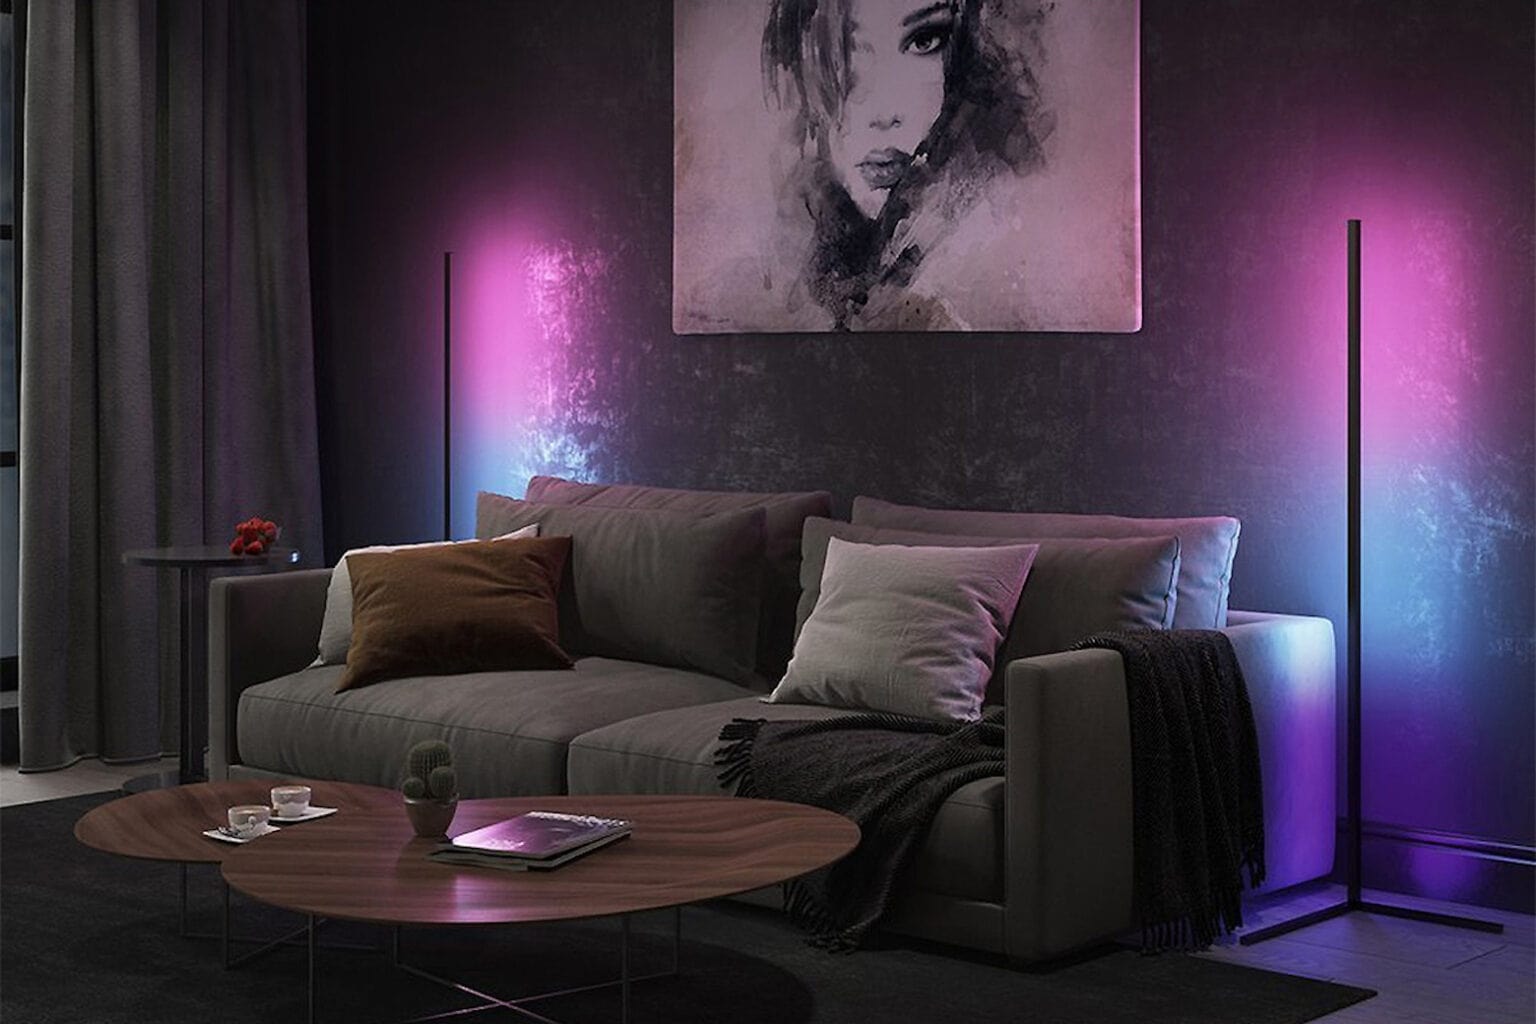 Give your room the hue-man touch with these gorgeous LED corner lamps.